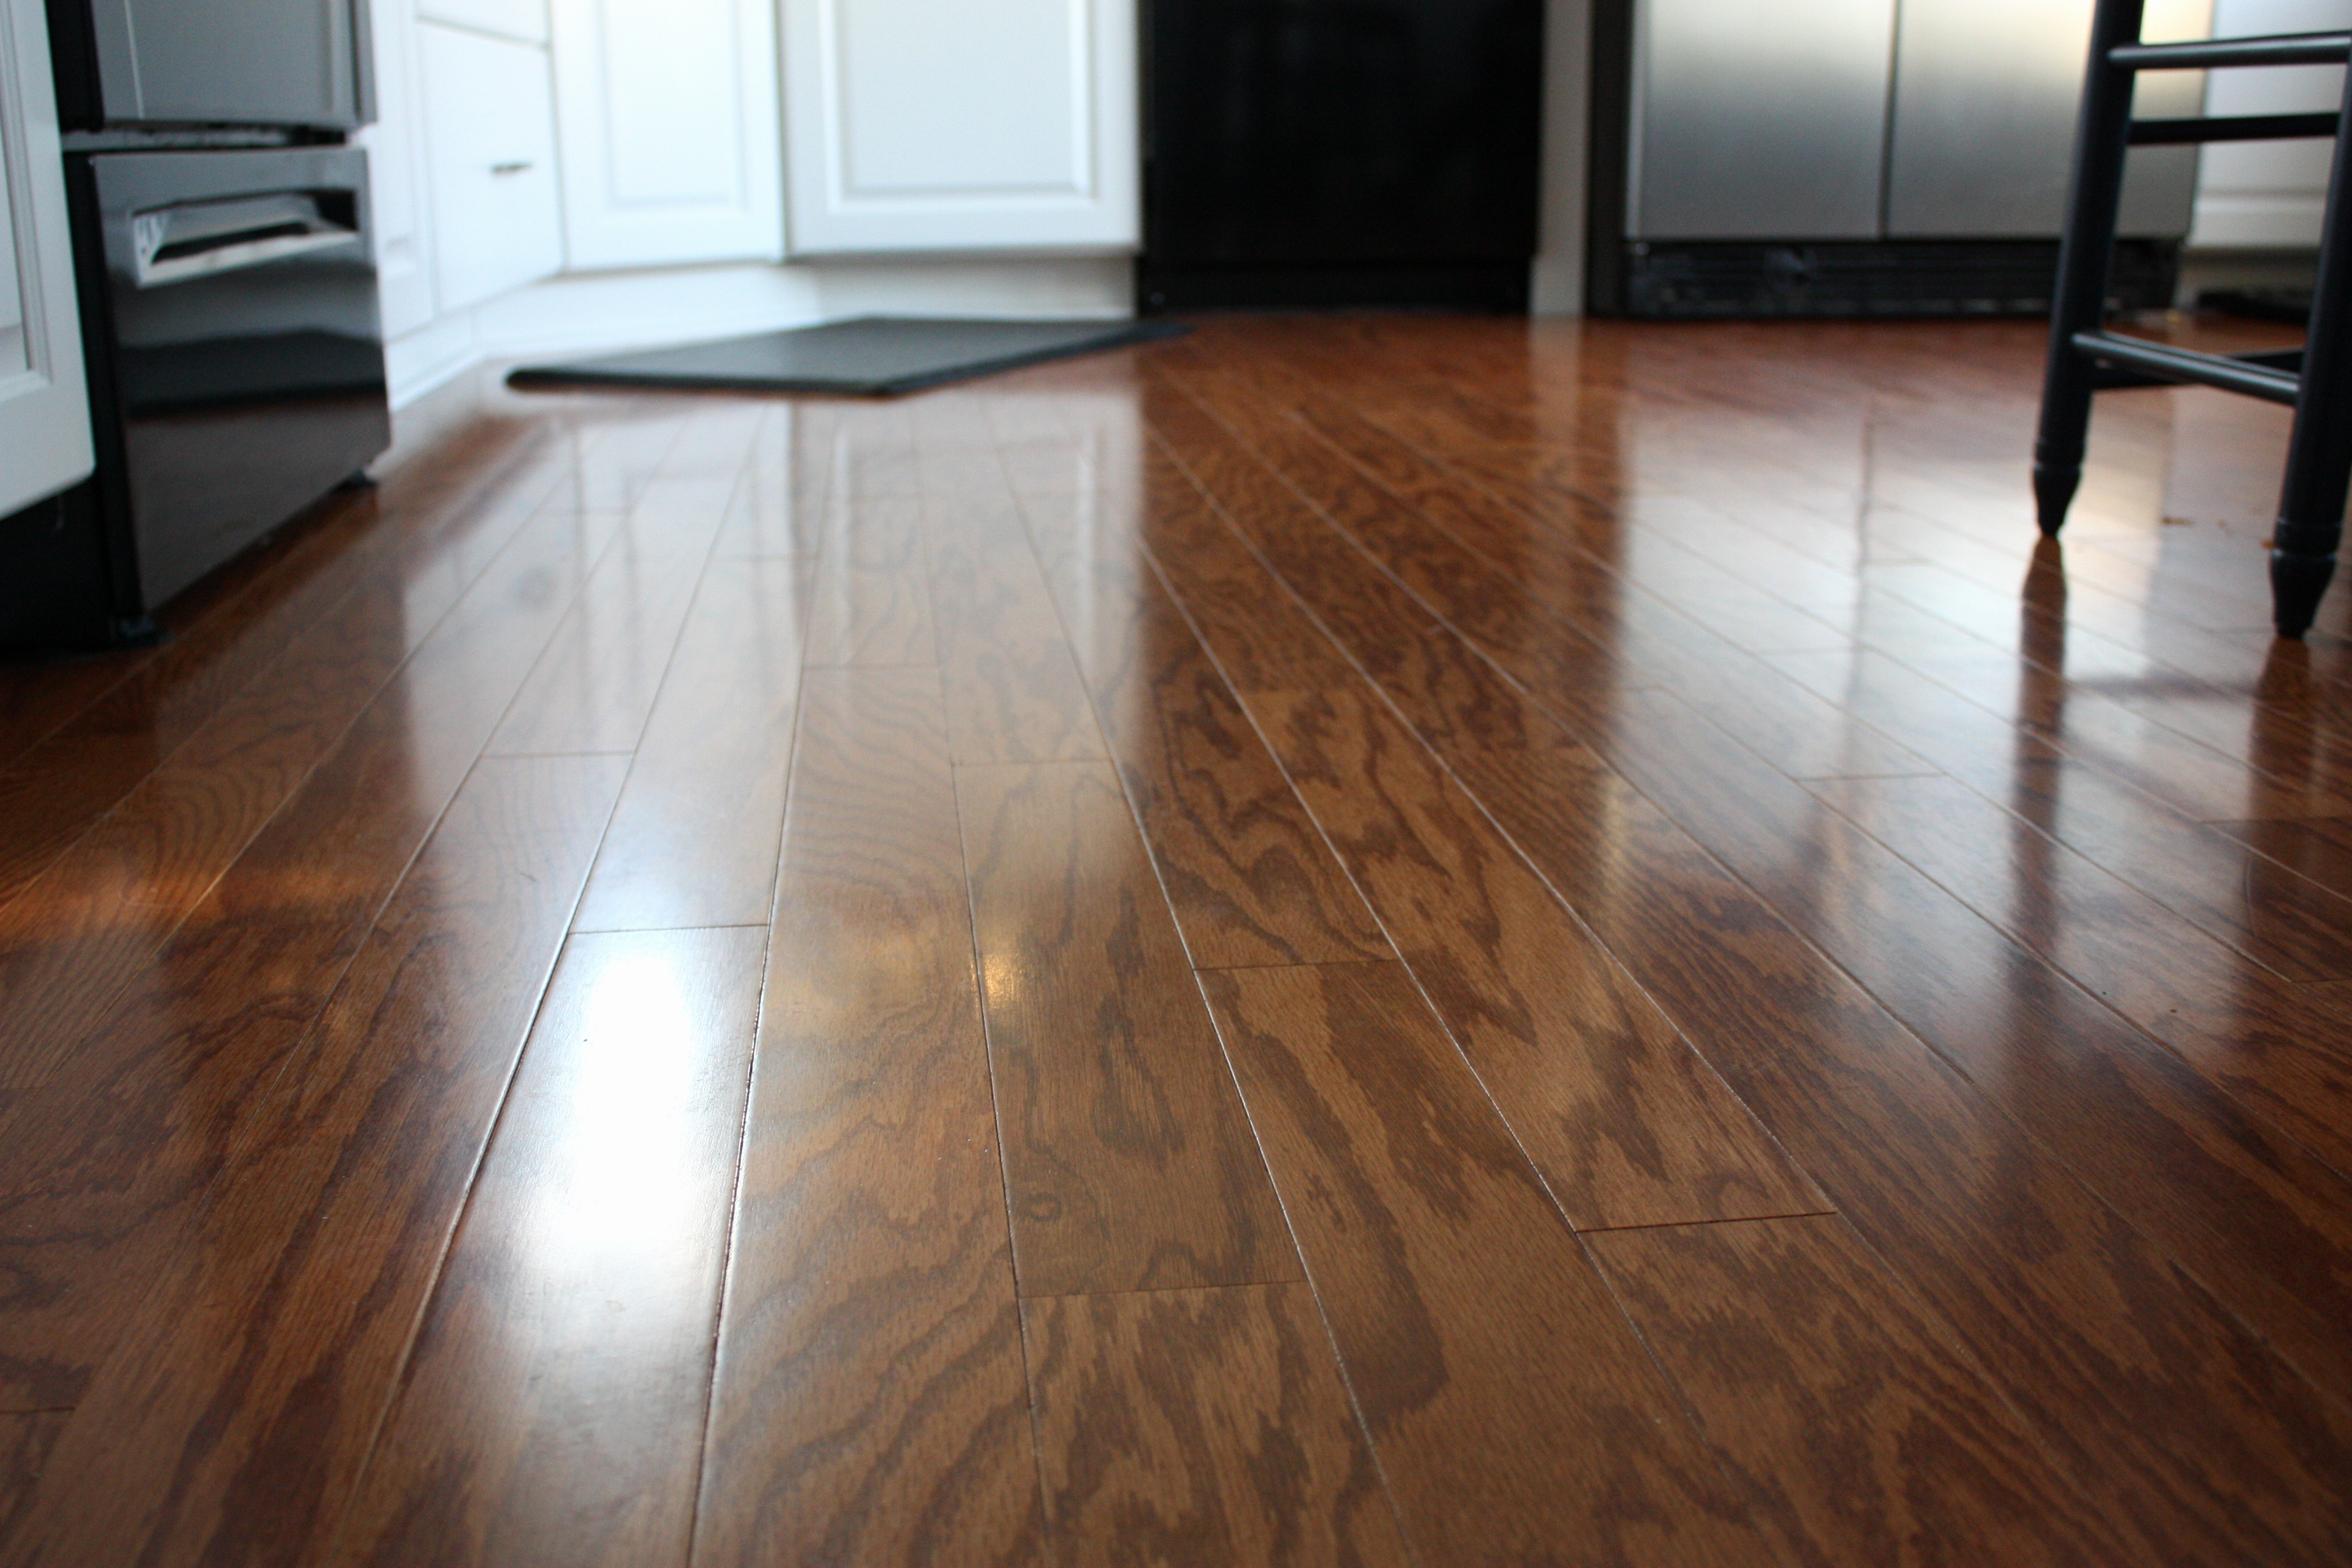 21 Famous Hardwood Floor Cleaning Companies 2024 free download hardwood floor cleaning companies of wood floor cleaner we fer cleaning services for carpets and tiles intended for wood floor cleaner best hardwood floor cleaner elegant floor a close up sh